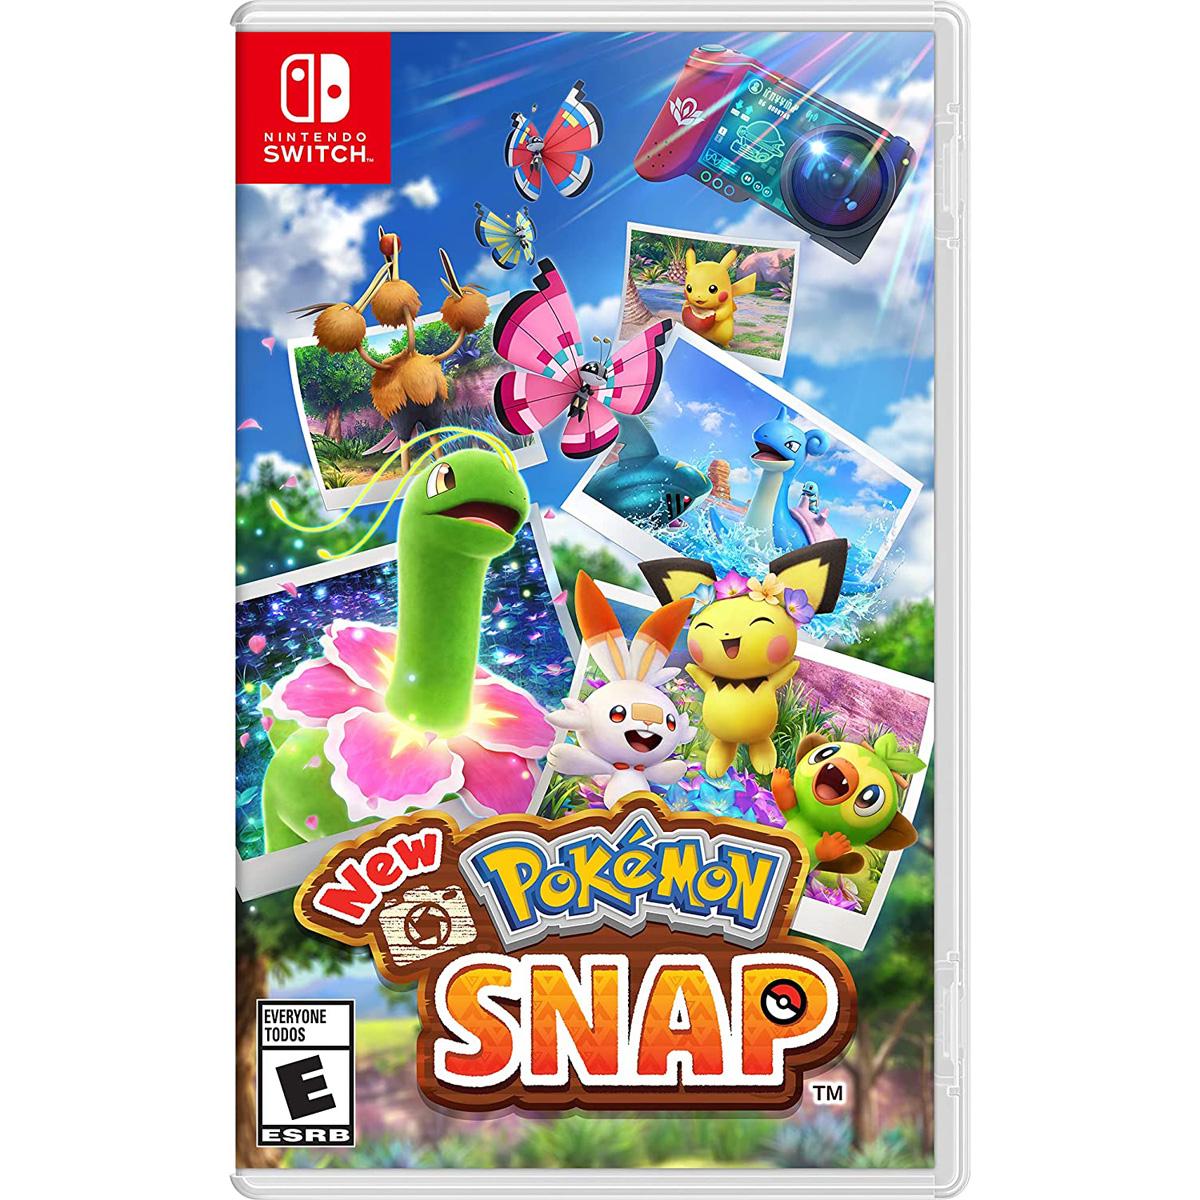 New Pokemon Snap Switch Game for $39.99 Shipped